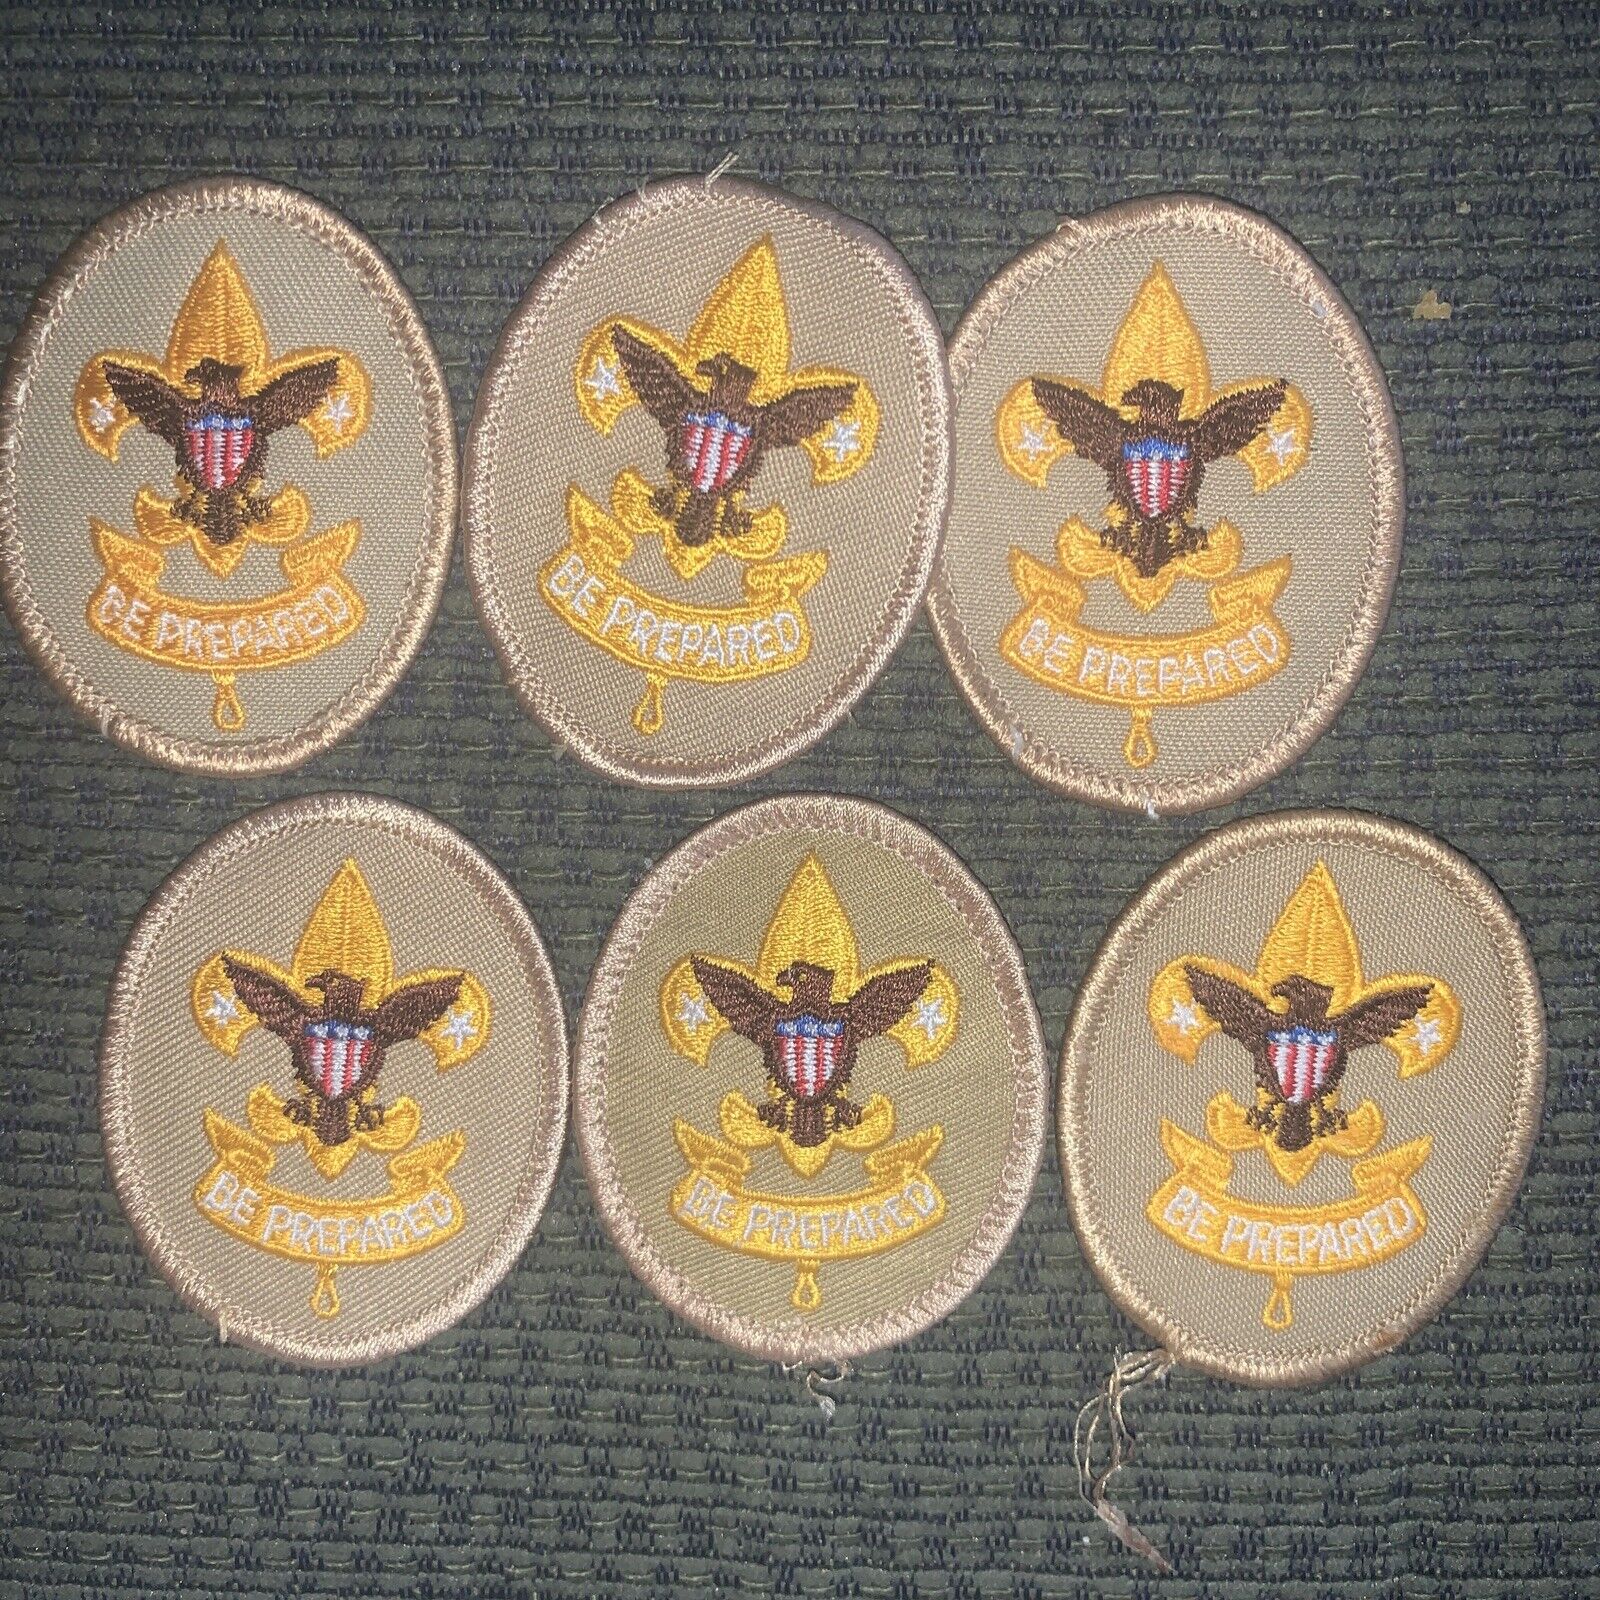 Current Issue First Class Scout Rank Oval Boy Scout Patch